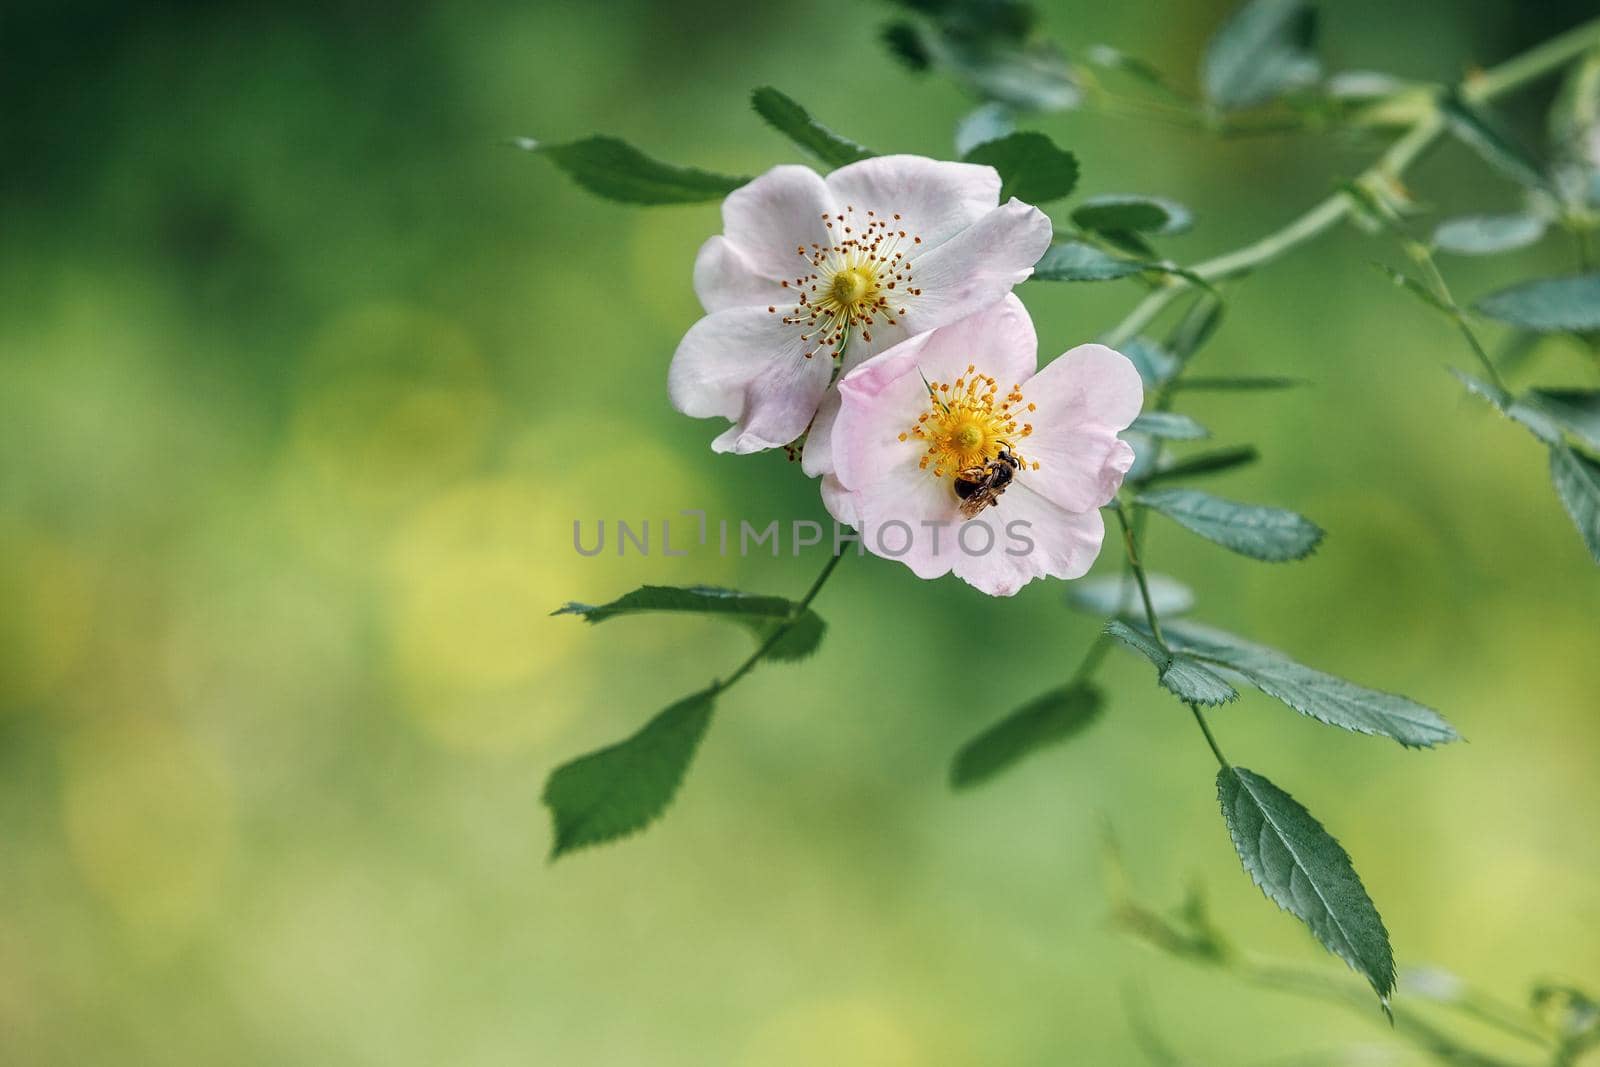 Light rose white flower of a wild rose dog rose against a background of green leaves. Free space for text. Greeting card. by Lincikas